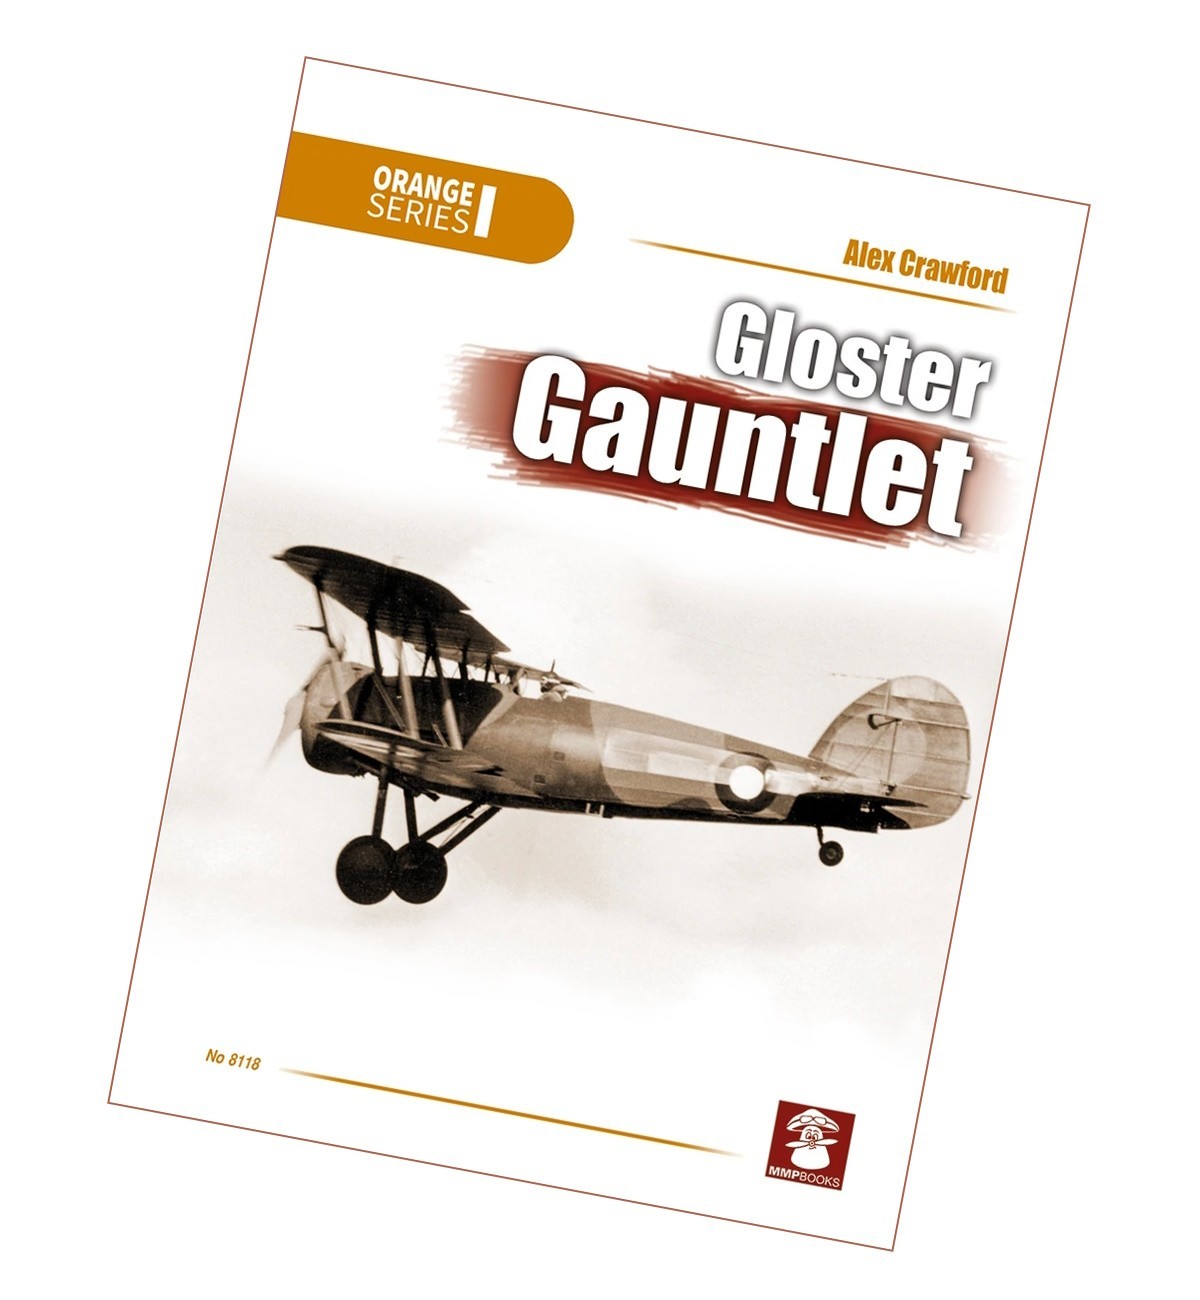 Stratus/ Mushroom Model Publications [MMP] has re-published their Orange order monograph at the Gloster Gauntlet